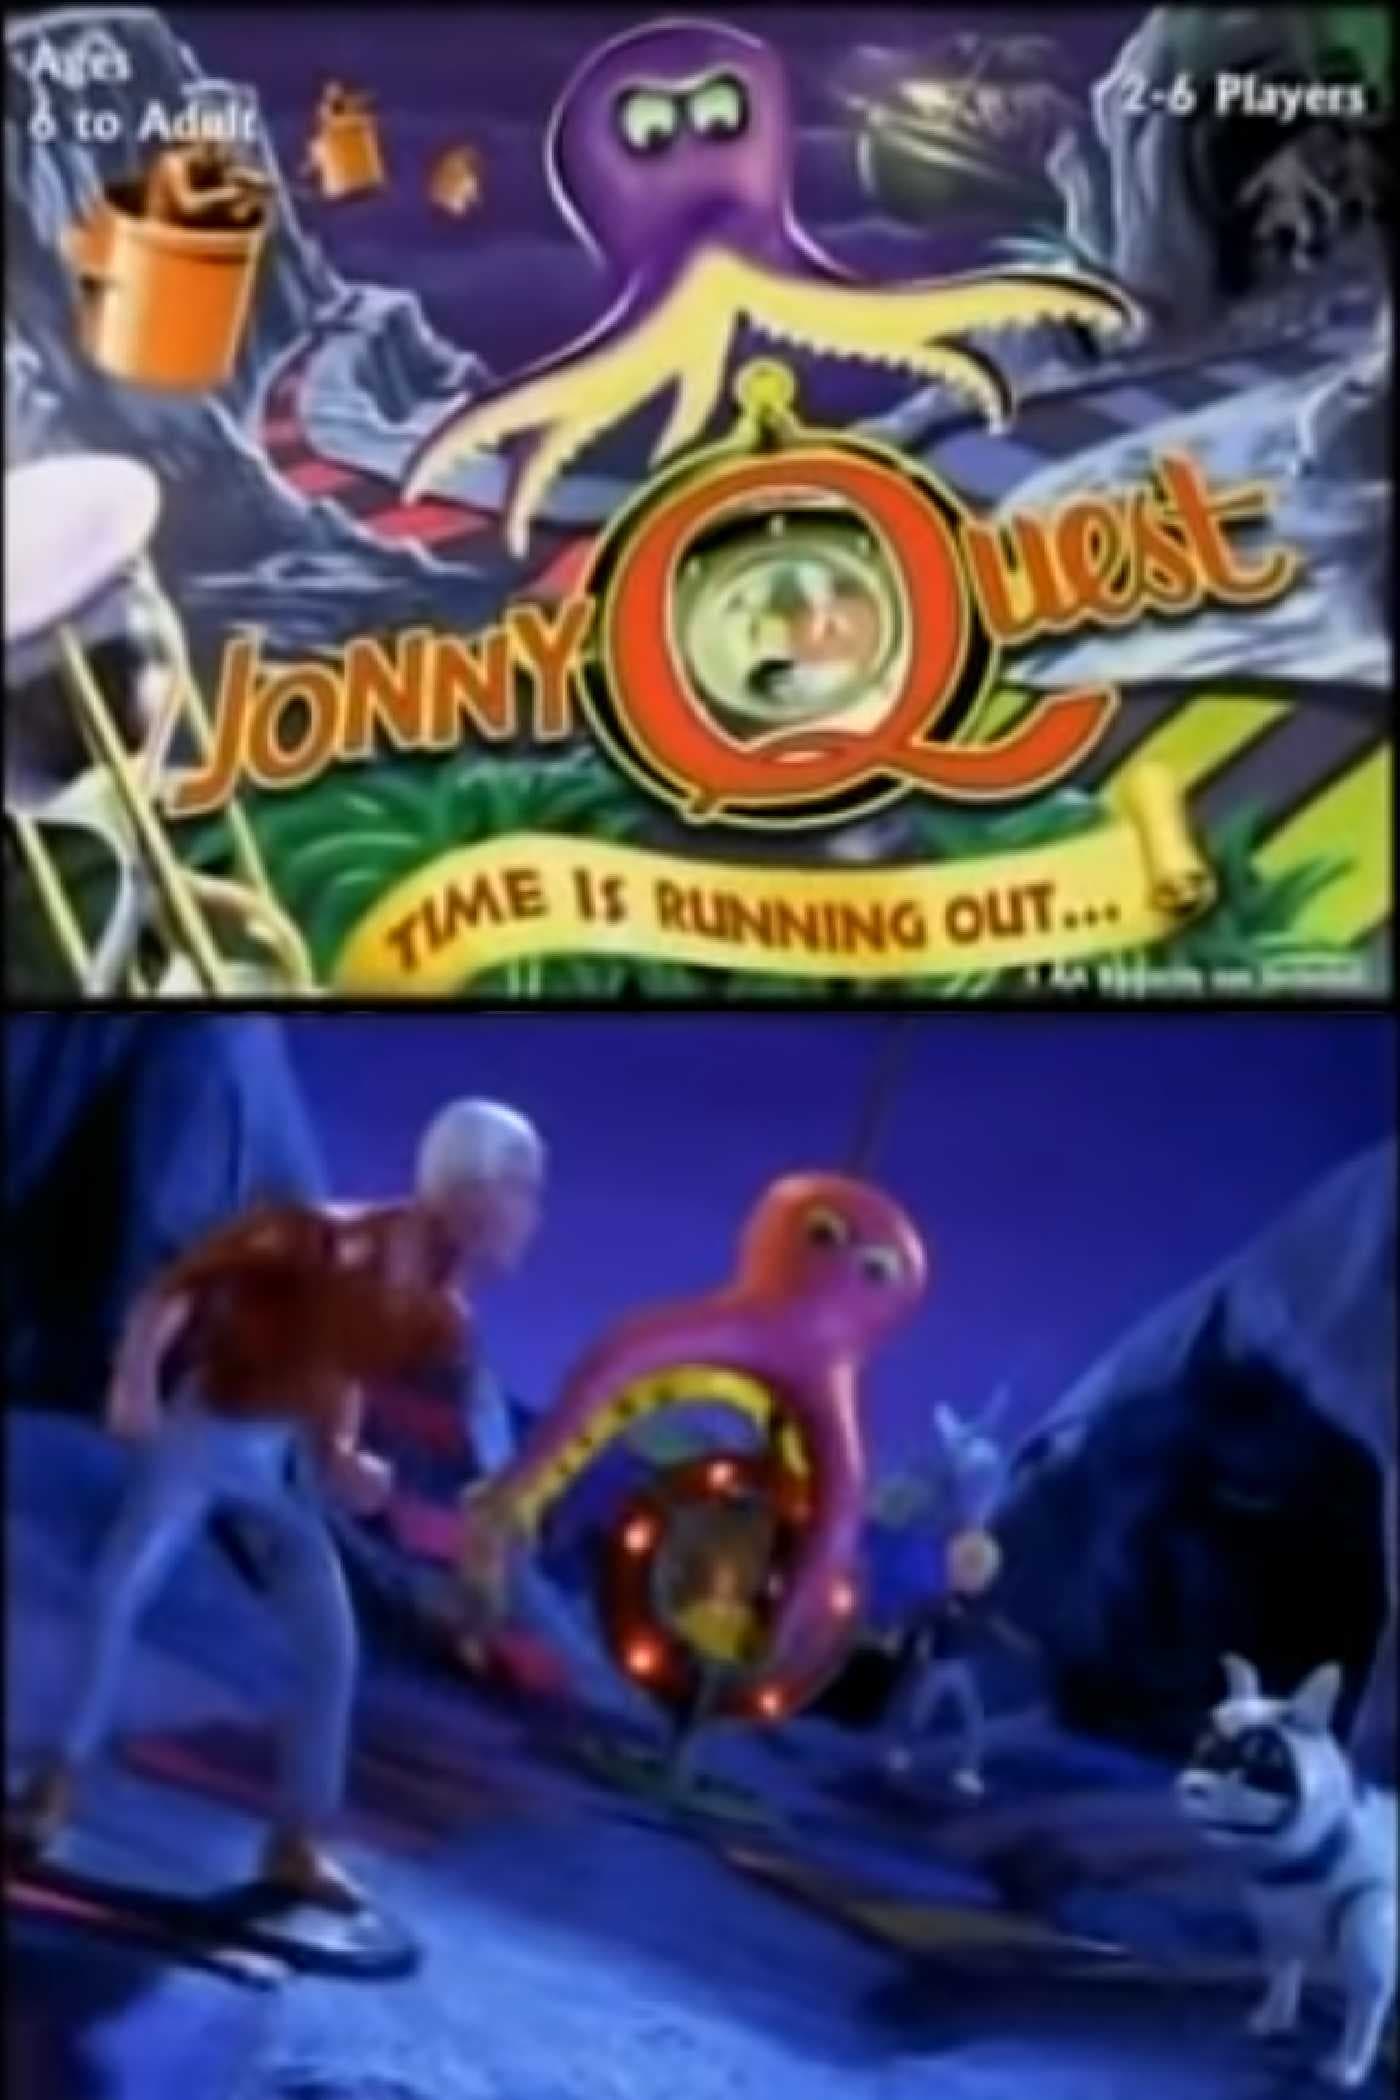 Jonny Quest: Time is Running Out